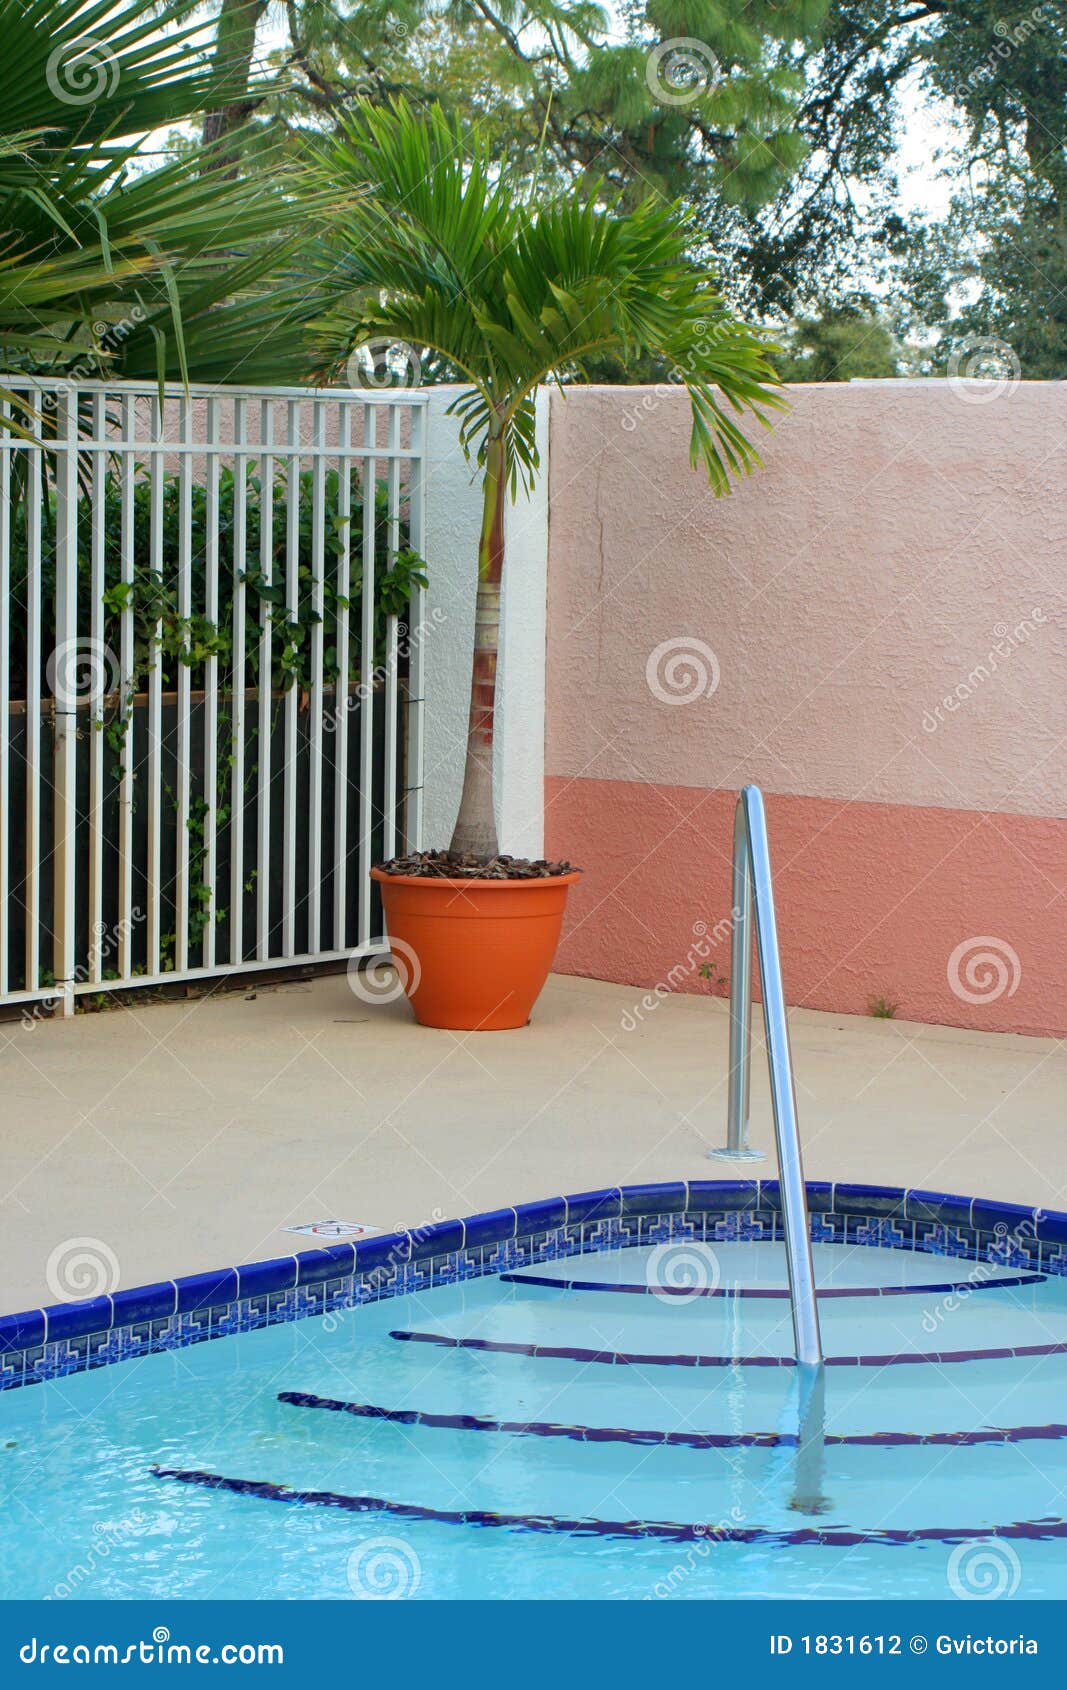 Pool Deck Stock Photo Image Of Stairs Potted Trees  - Potted Plants Around Pool Deck